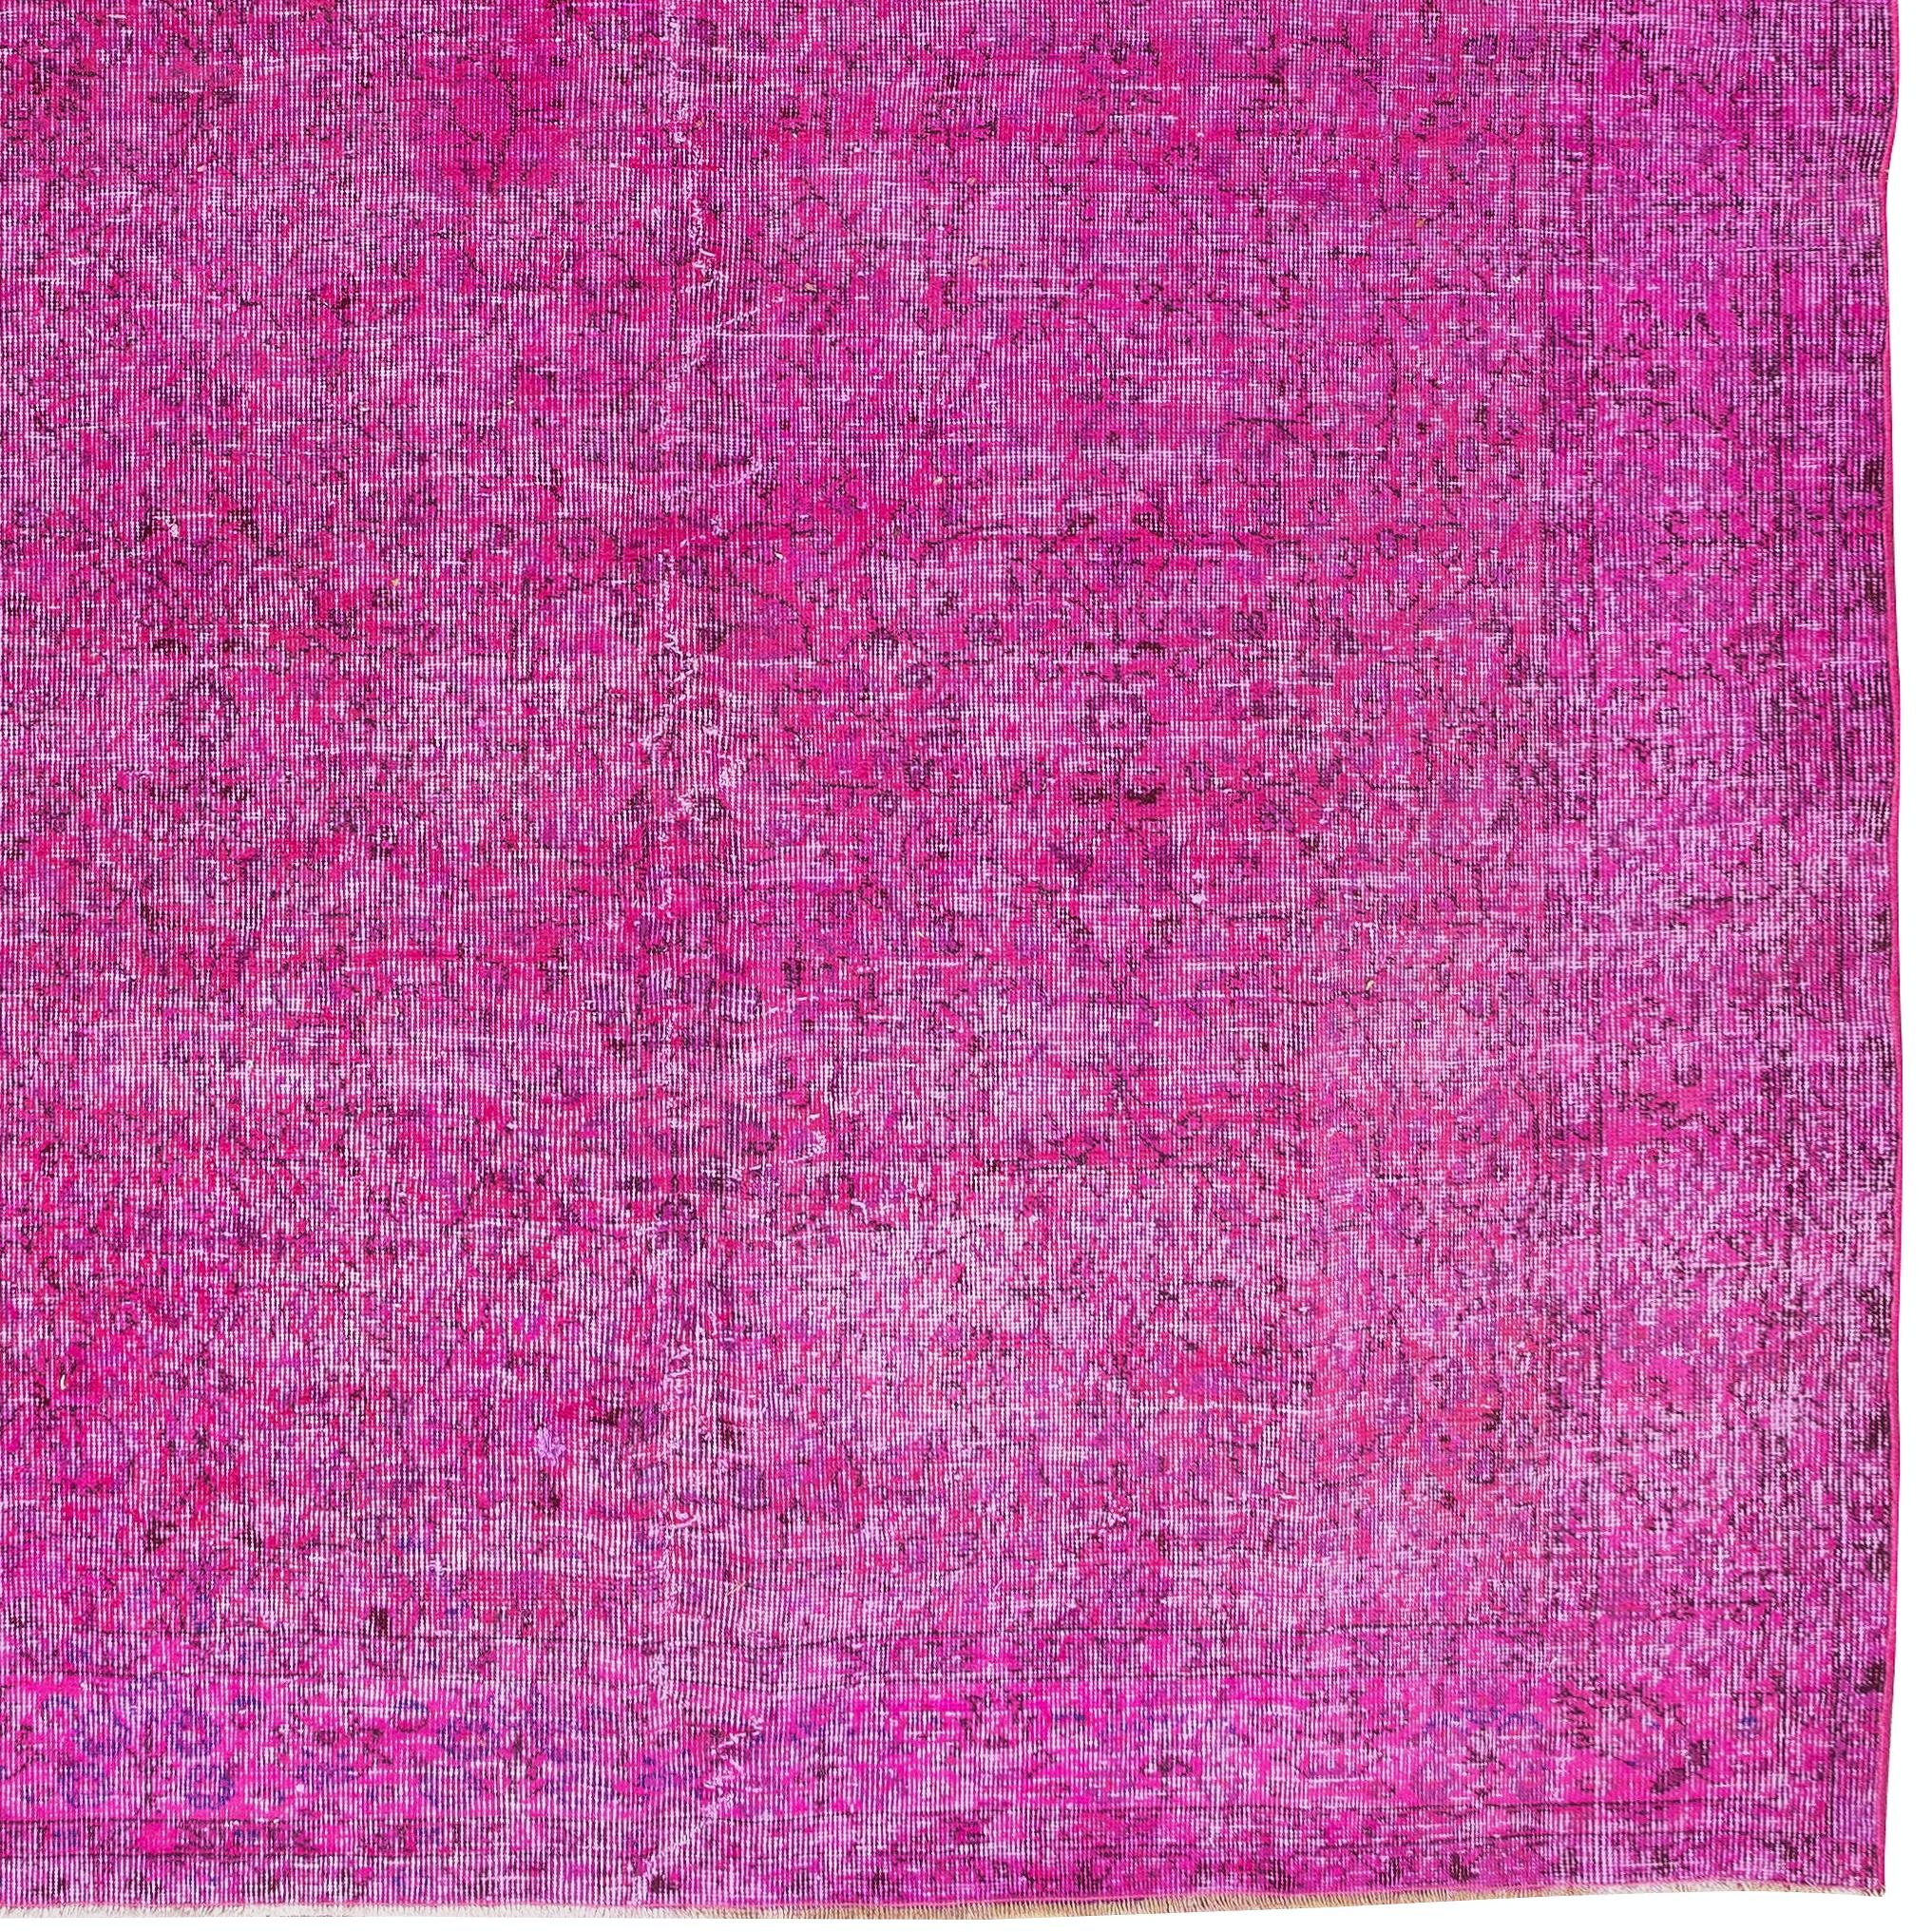 Hand-Knotted 6.7x10.4 Ft Hand Knotted Anatolian Area Rug in Fuchsia Pink 4 Modern Interiors For Sale